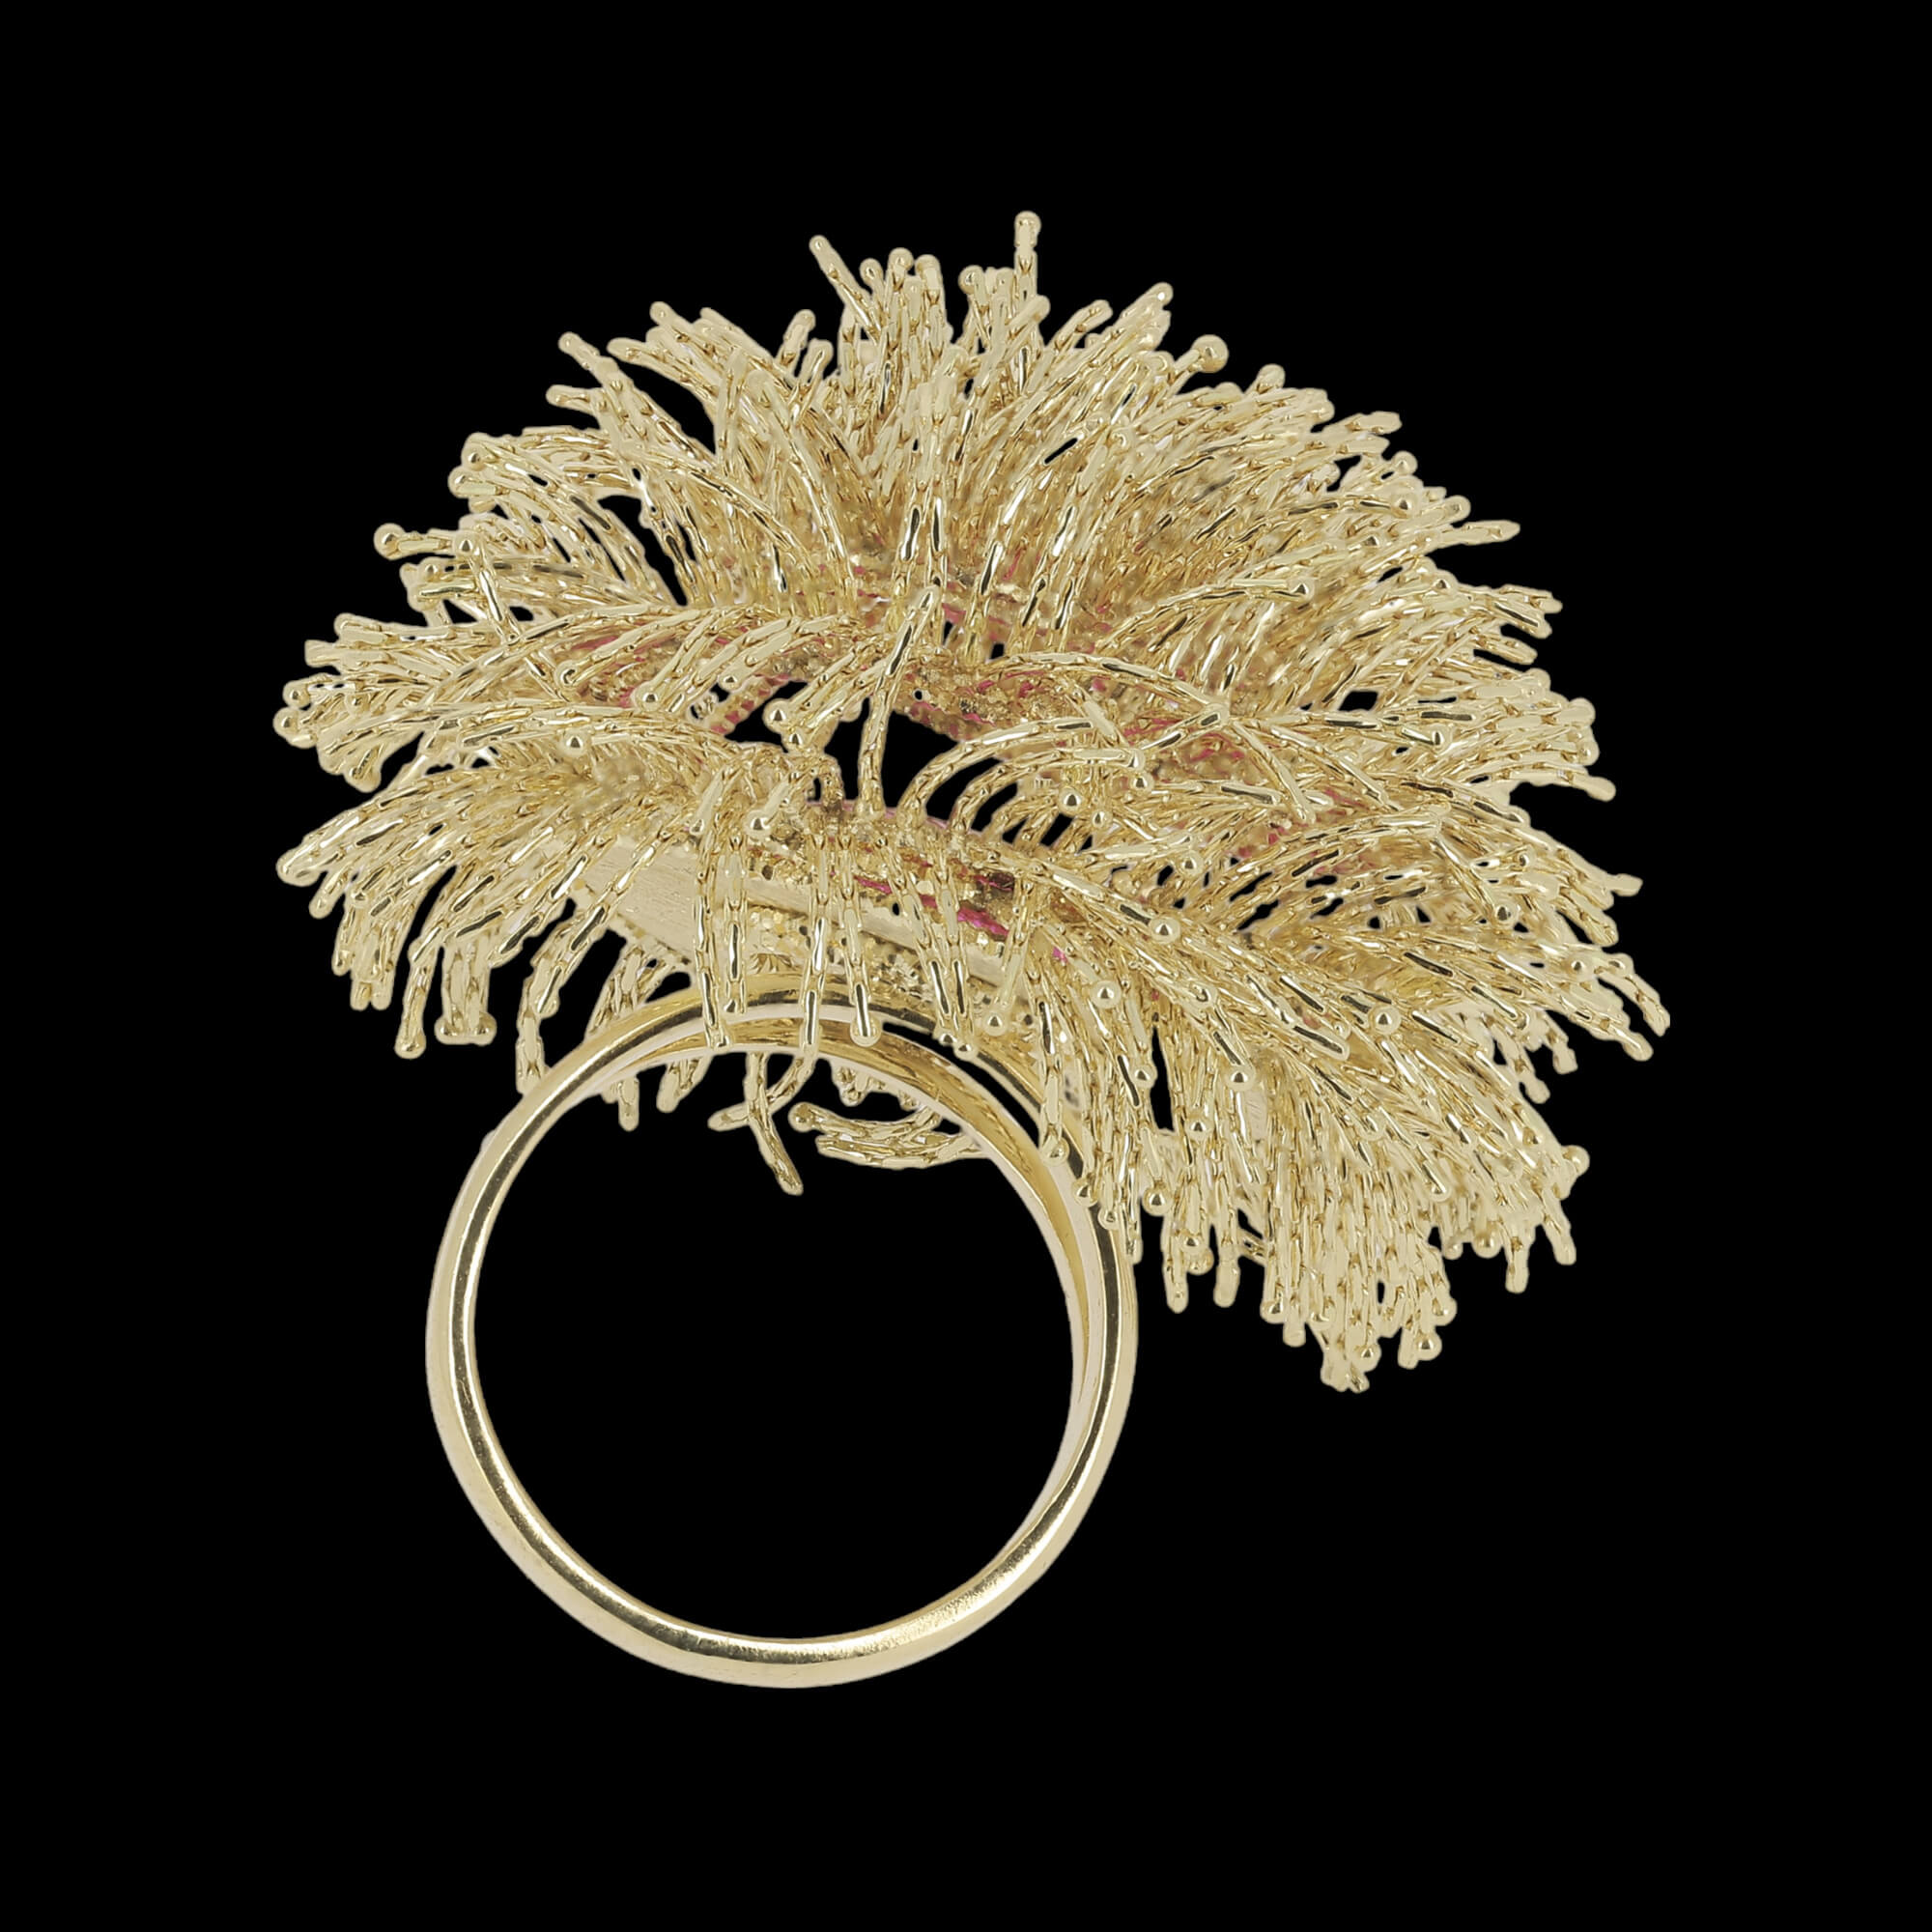 A large gold ring of 18kt with fringes